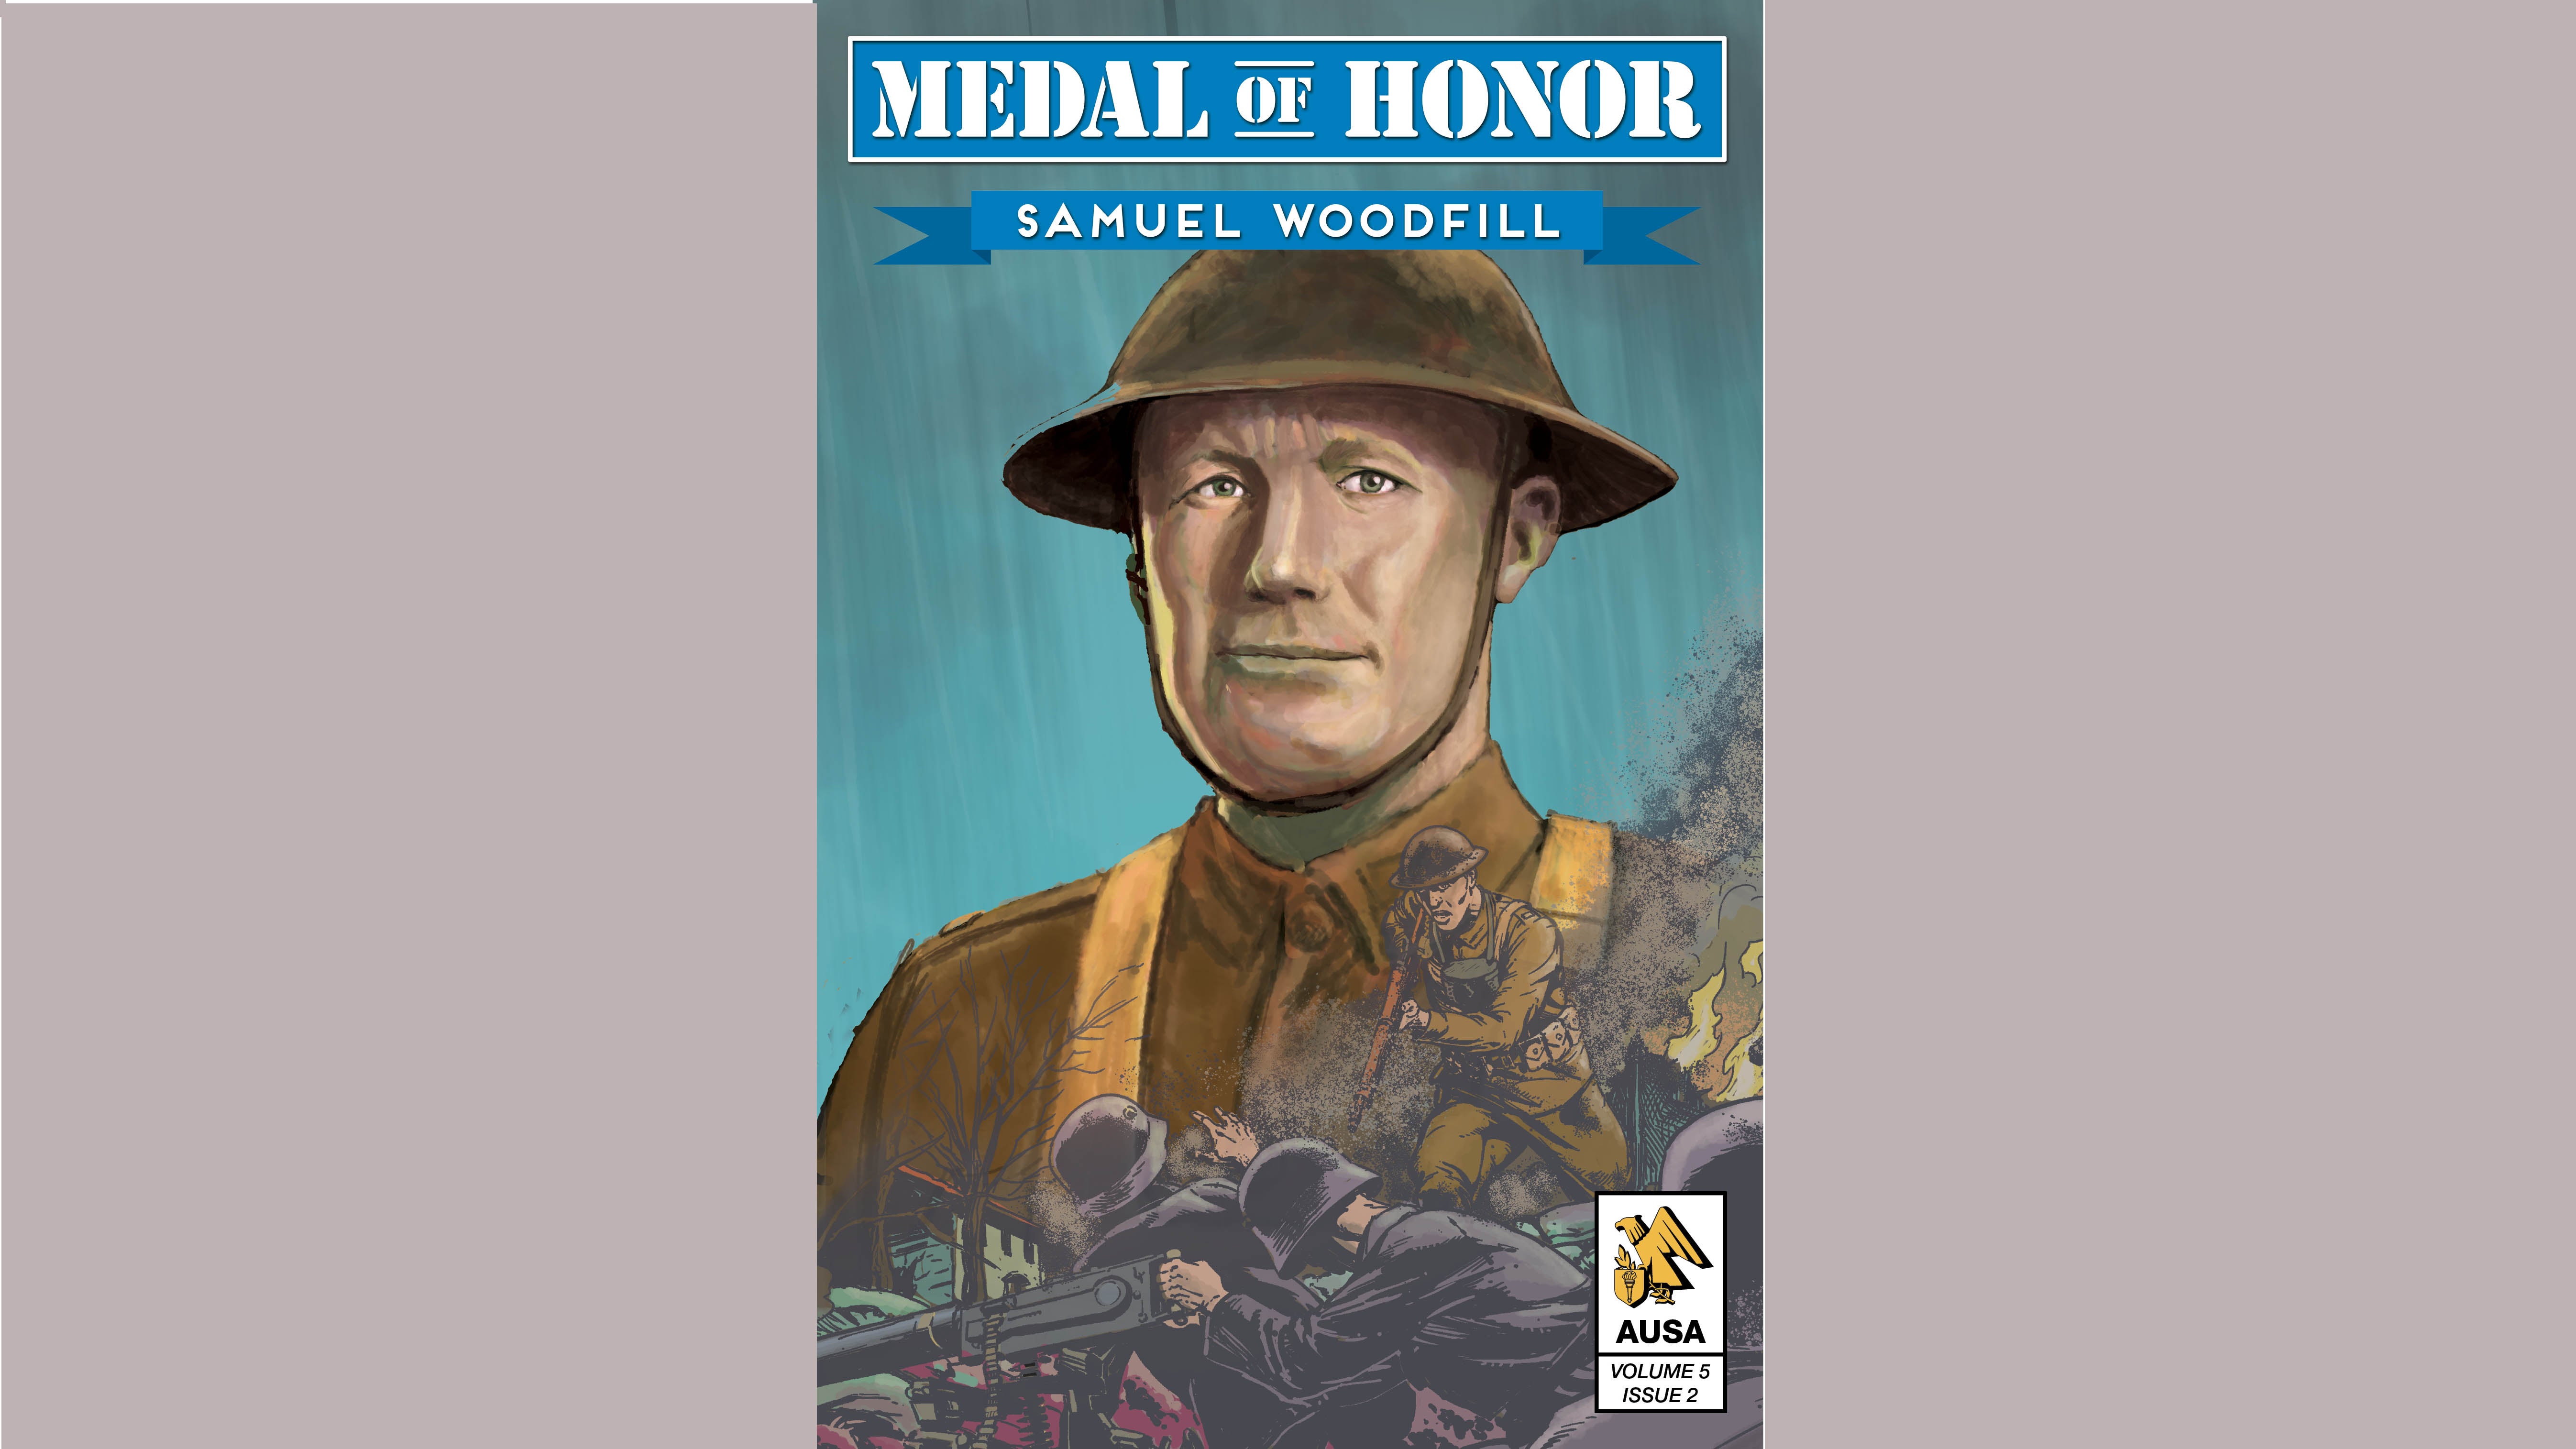 Cover image of the AUSA graphic novel on Samuel Woodfill.